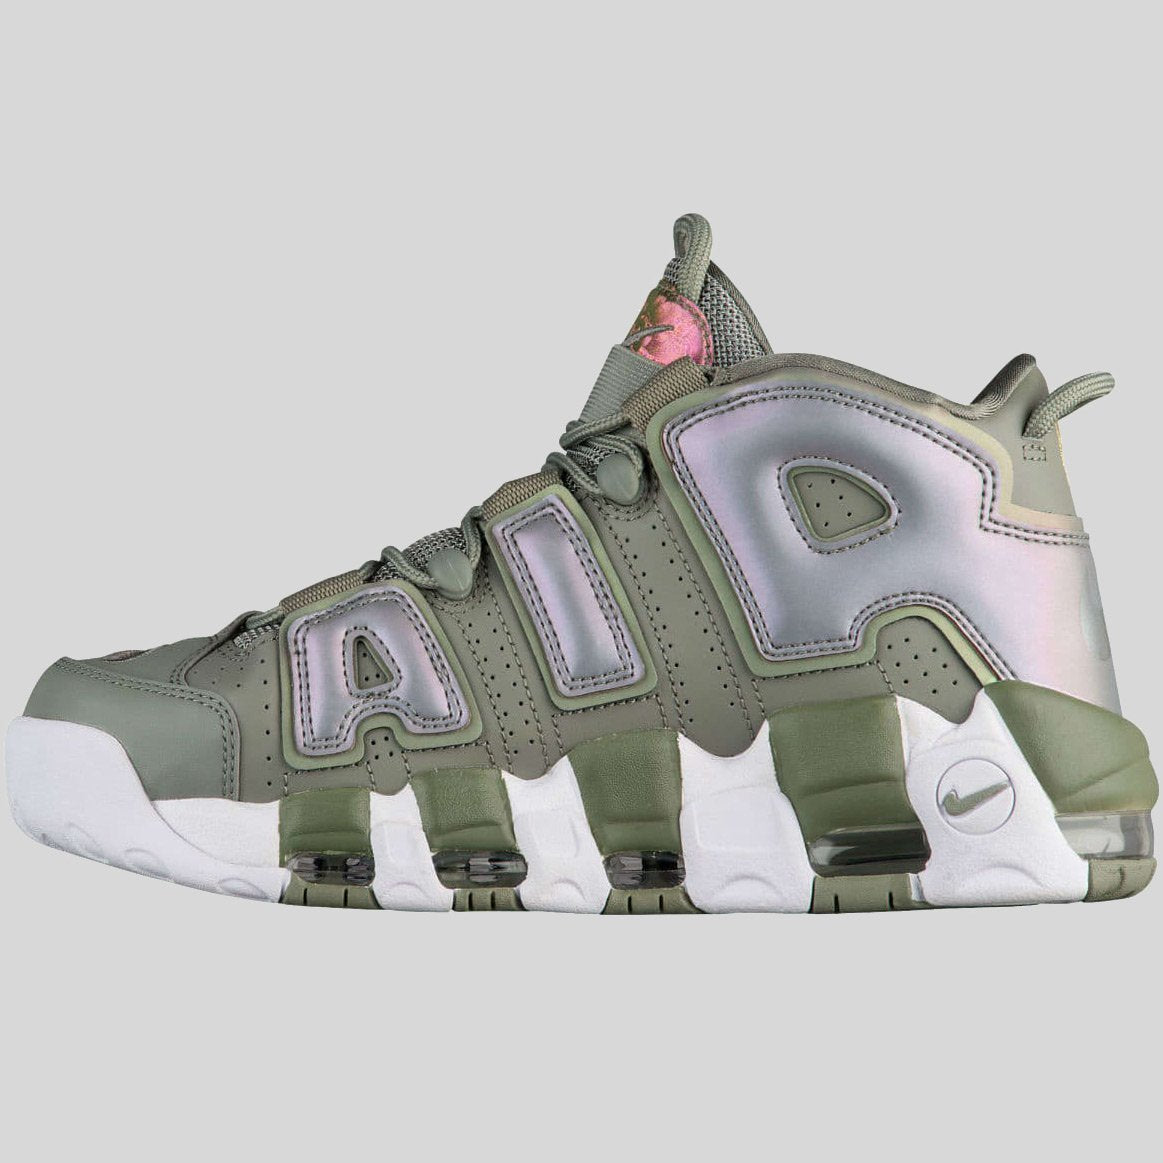 air more uptempo barely green